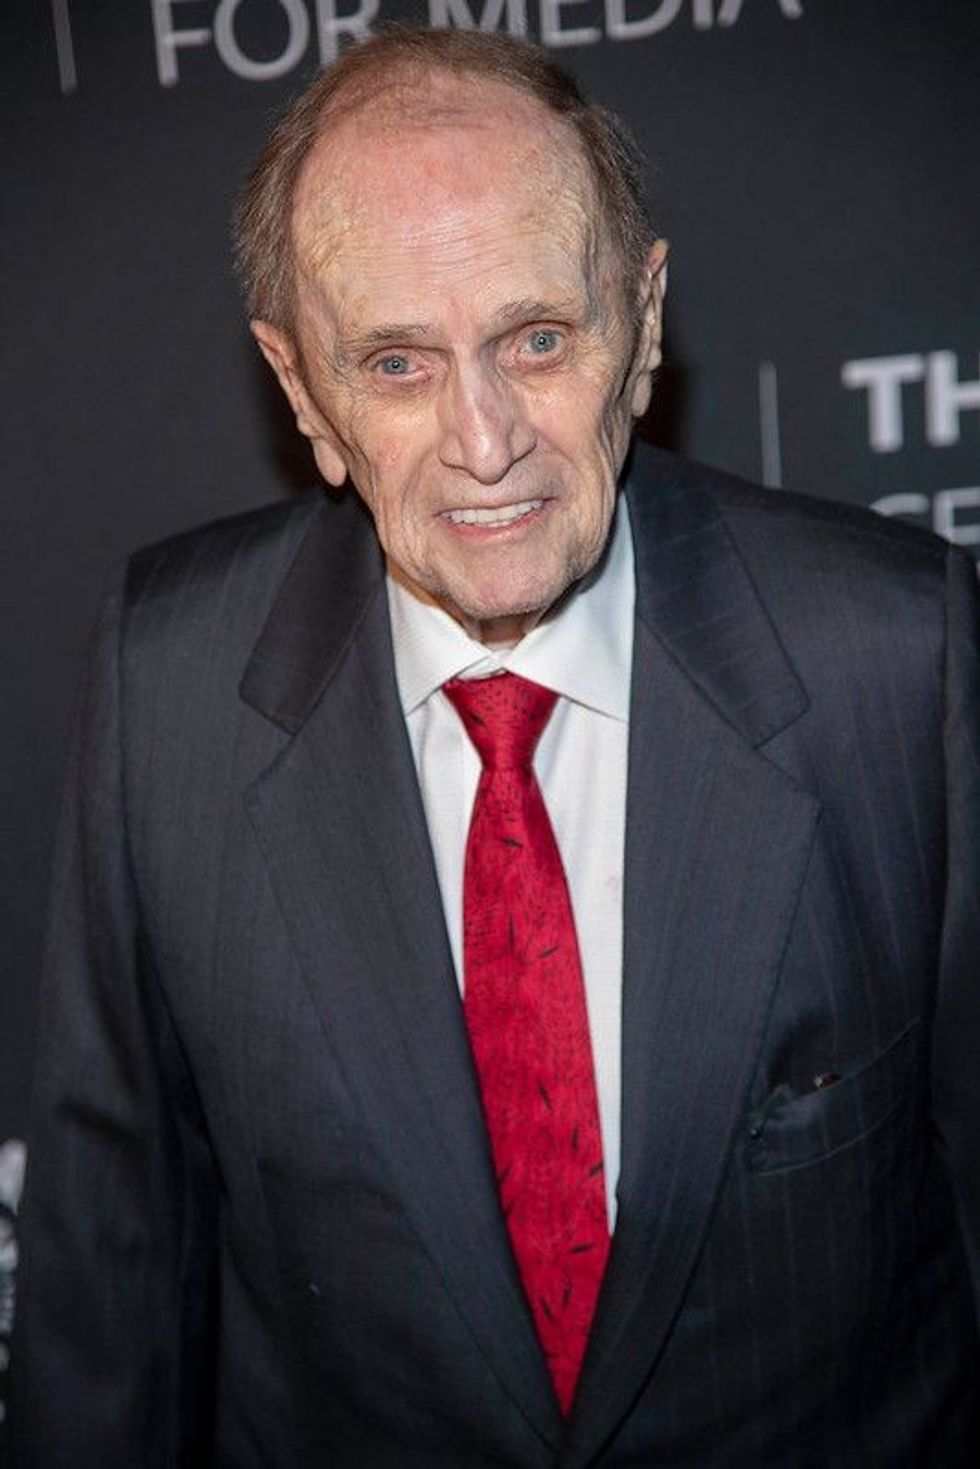 Comedy recordings of Bob Newhart from his early stand-ups in 196o became a huge bestseller, winning him his first Grammy Award.